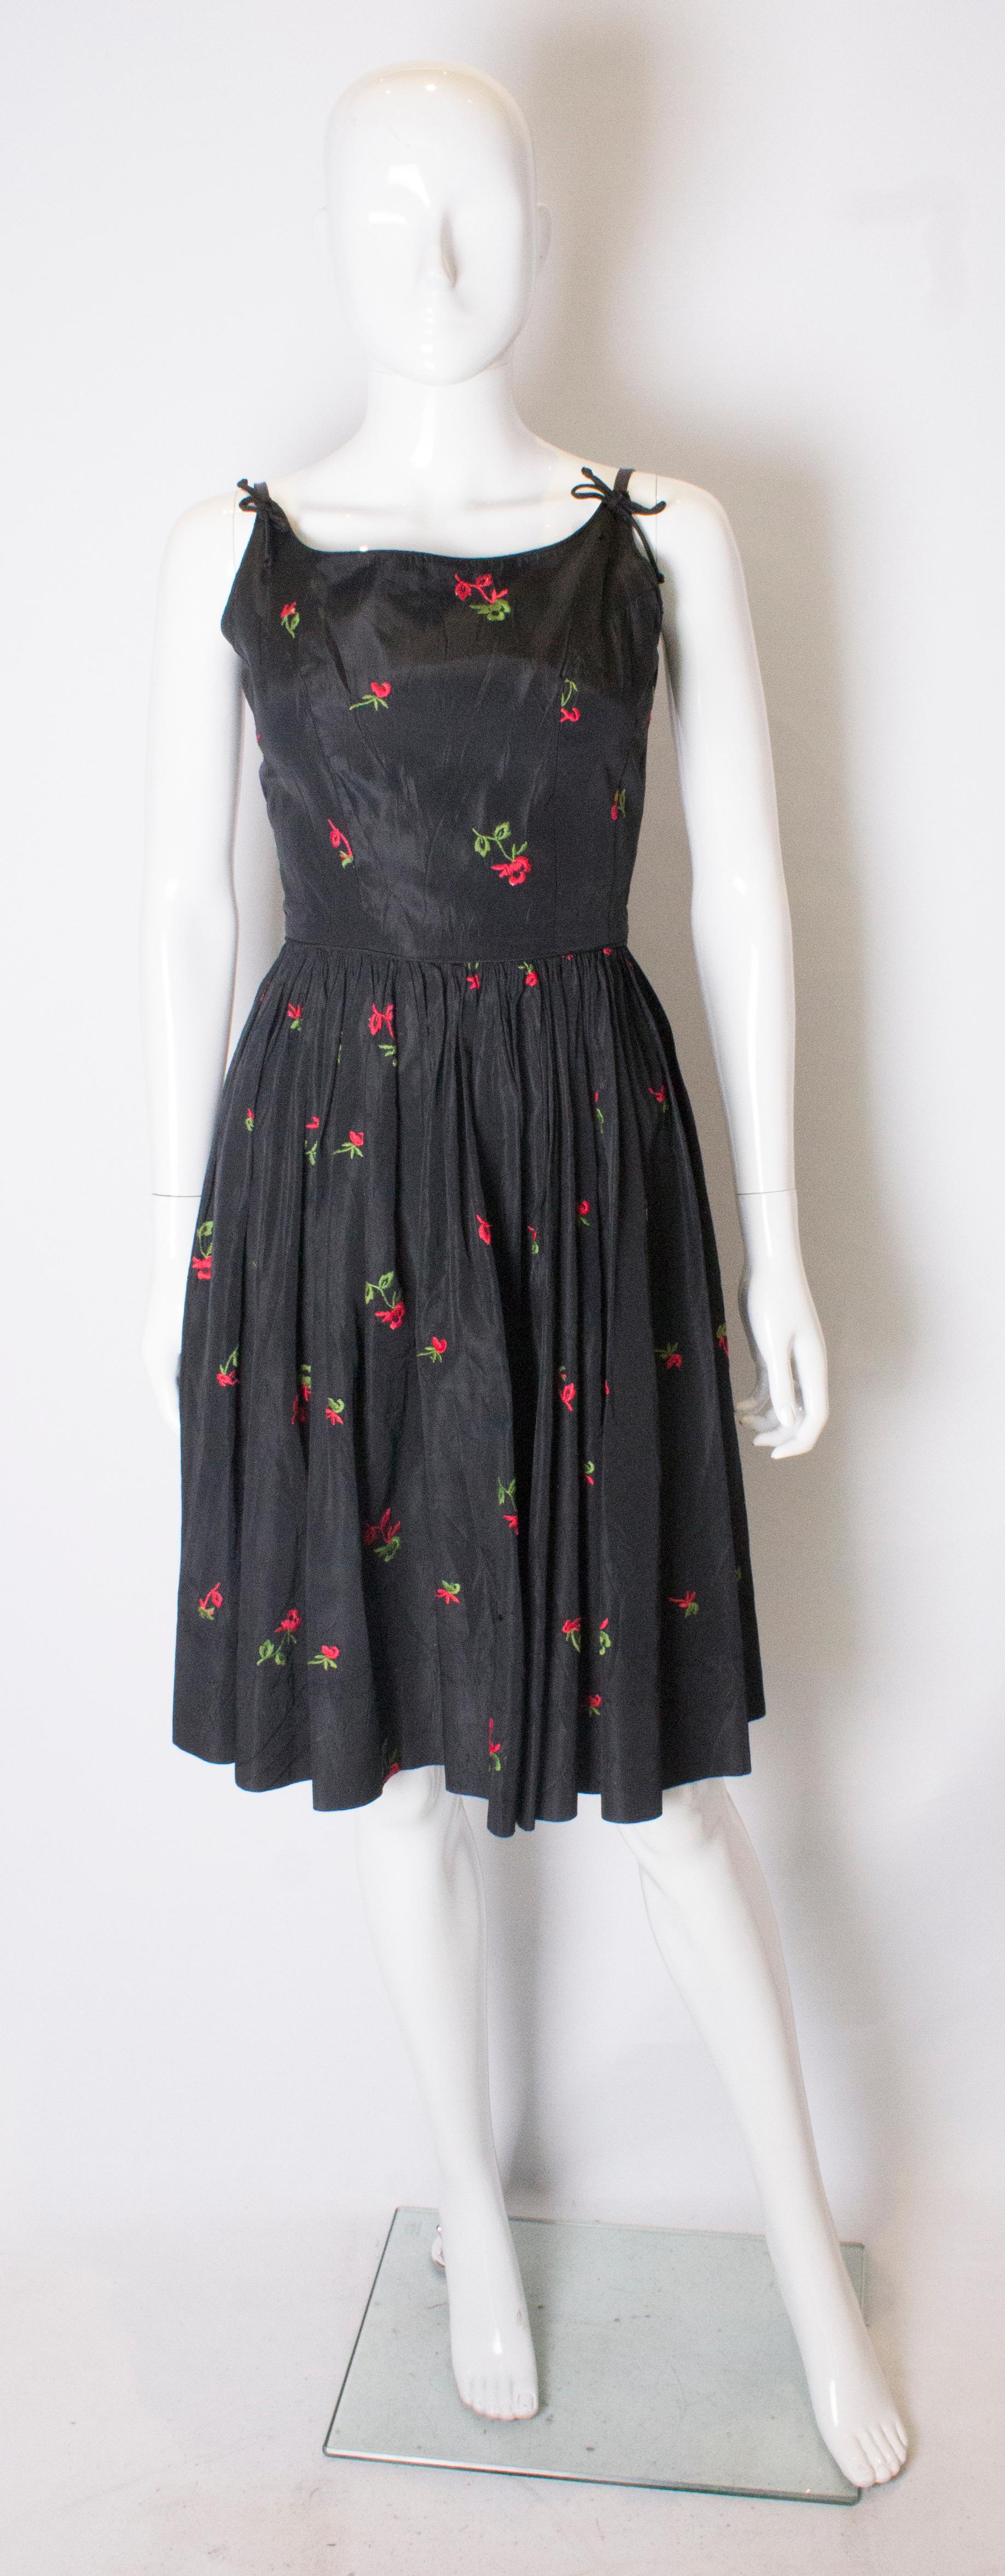 A Vintage 1950s black Rose Embroidered Cinch Swing Dress xs. 

taffeta fabric with red embroidered roses 

measurement taken flat in inches 

bust - 16
waist - 12.5
length - 40
